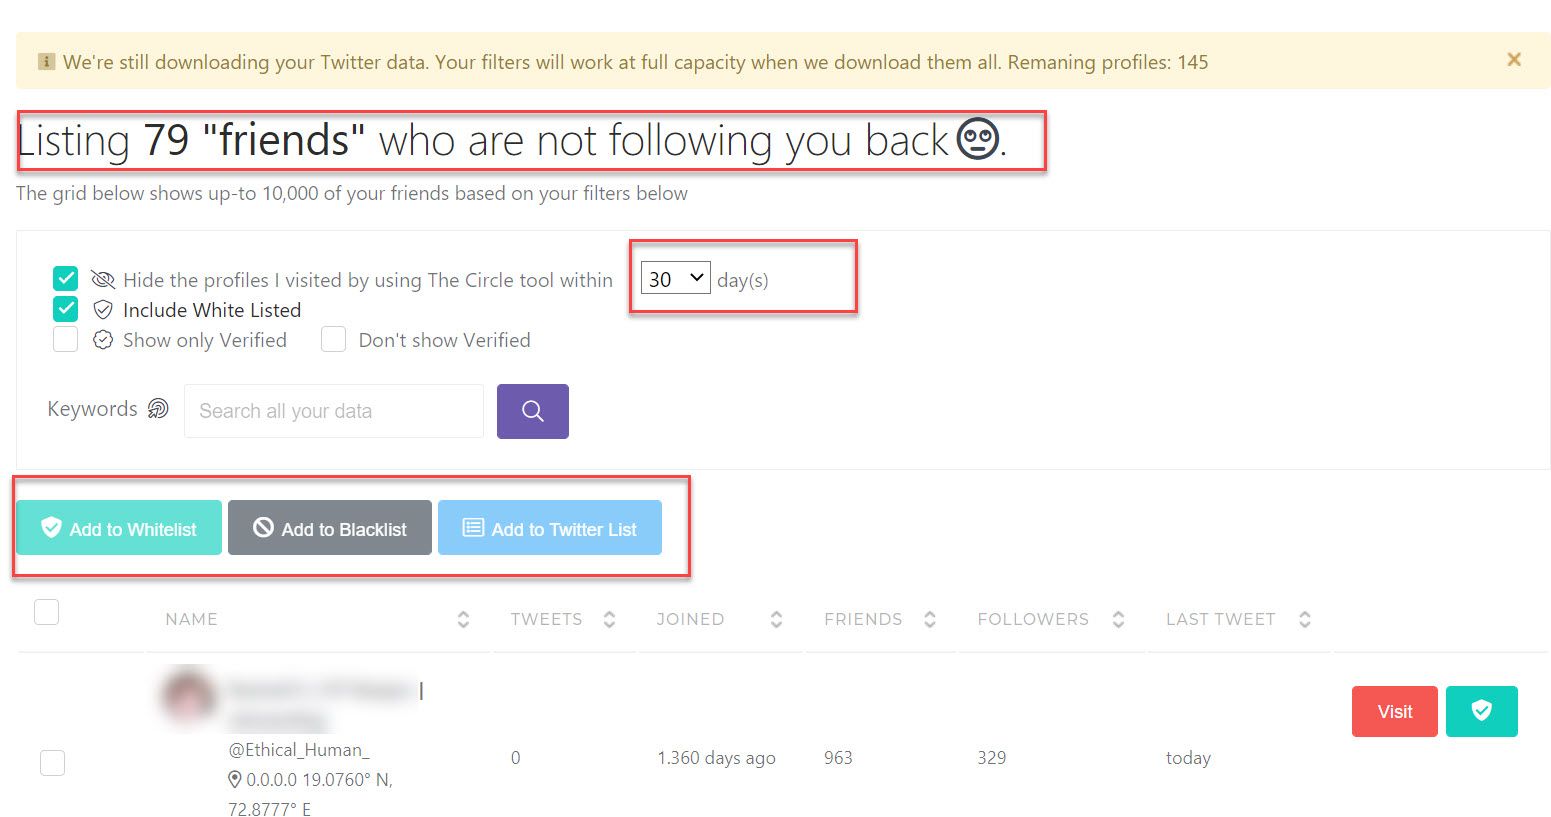 Find out those who are not following you back, filter them by keywords.